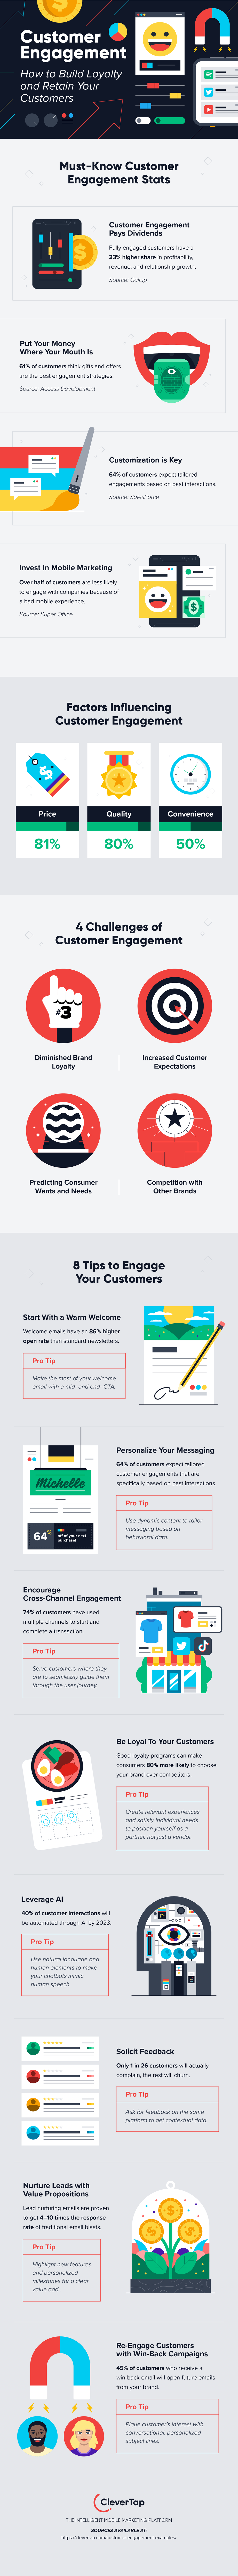 Customer engagement examples infographic